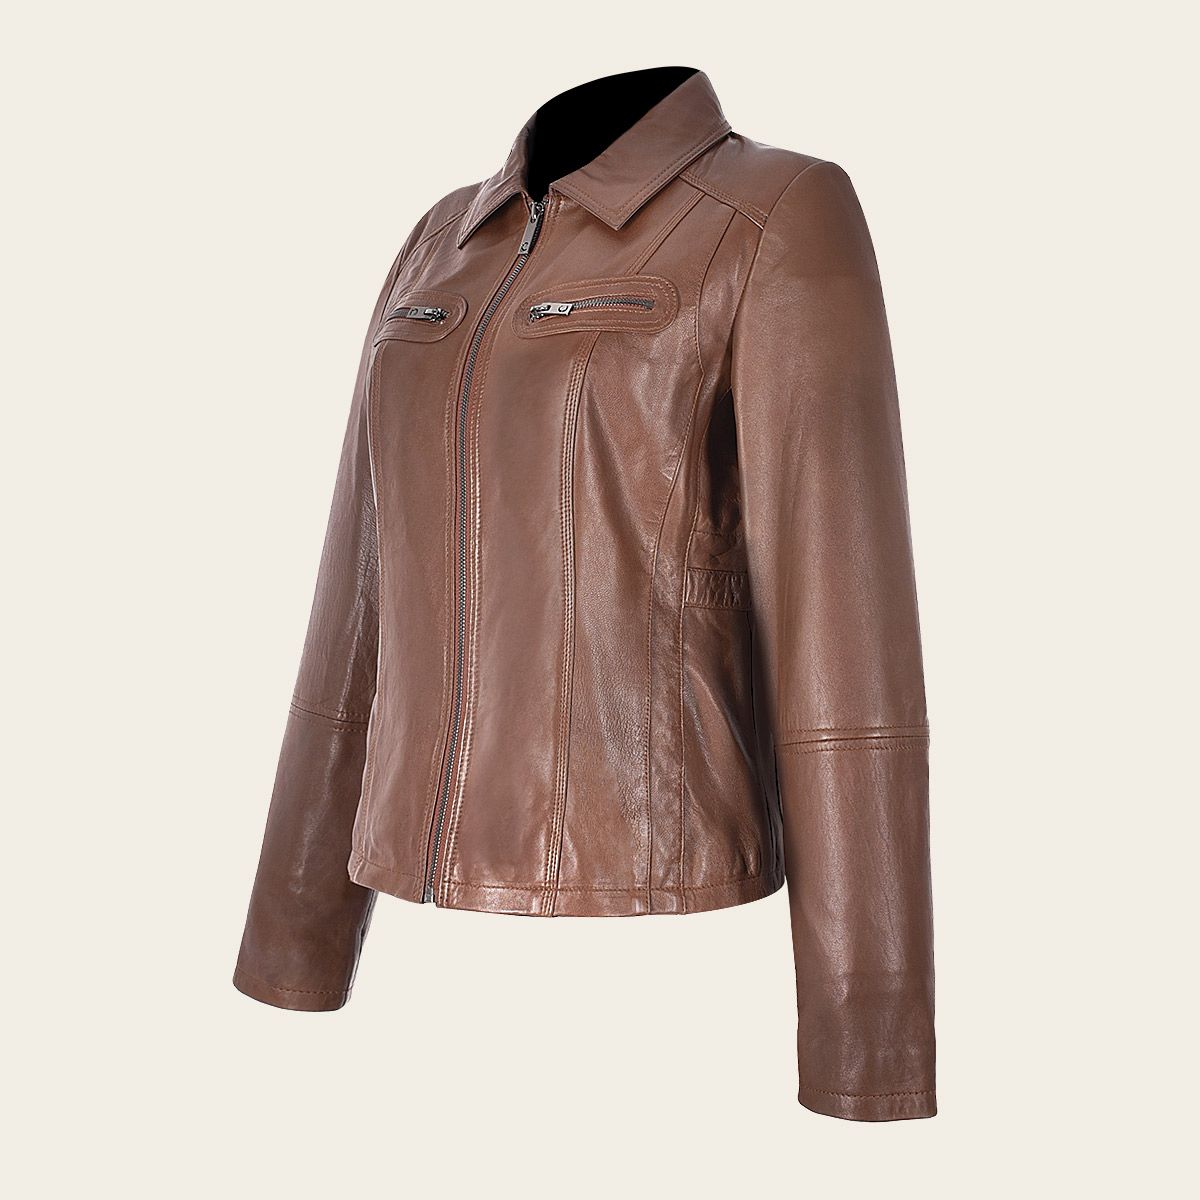 MCMP004 - Cuadra honey western leather jacket for women-Kuet.us - Cuadra Boots - Western Cowboy, Casual Fashion and Dress Boots